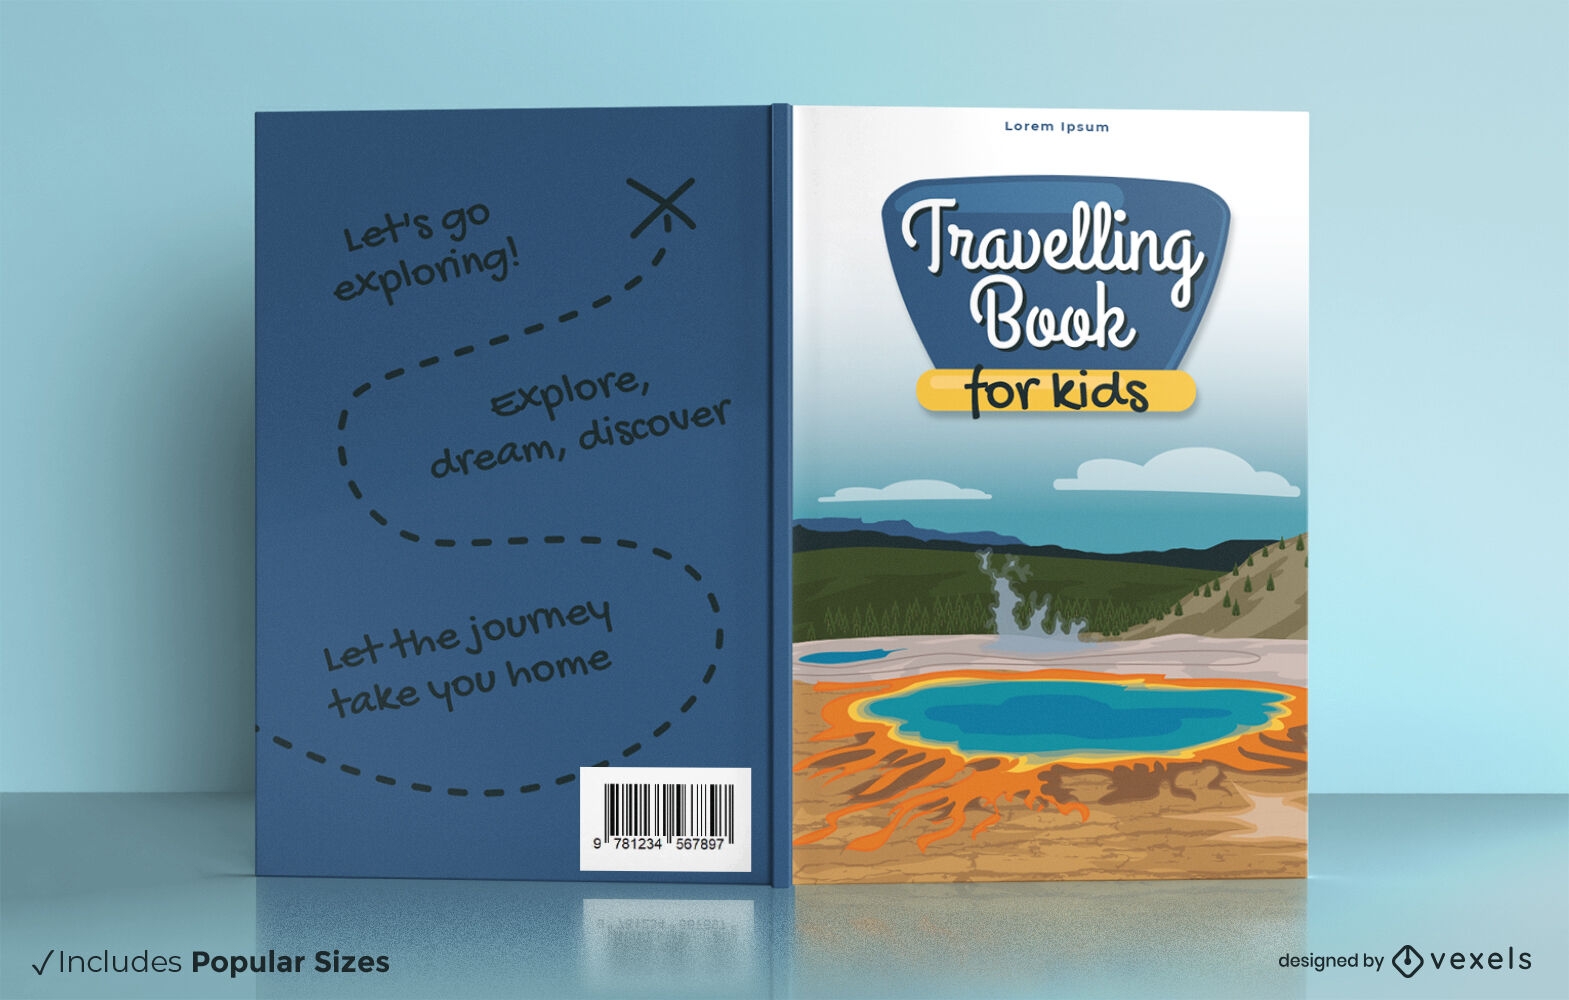 Travelling book for kids book cover design